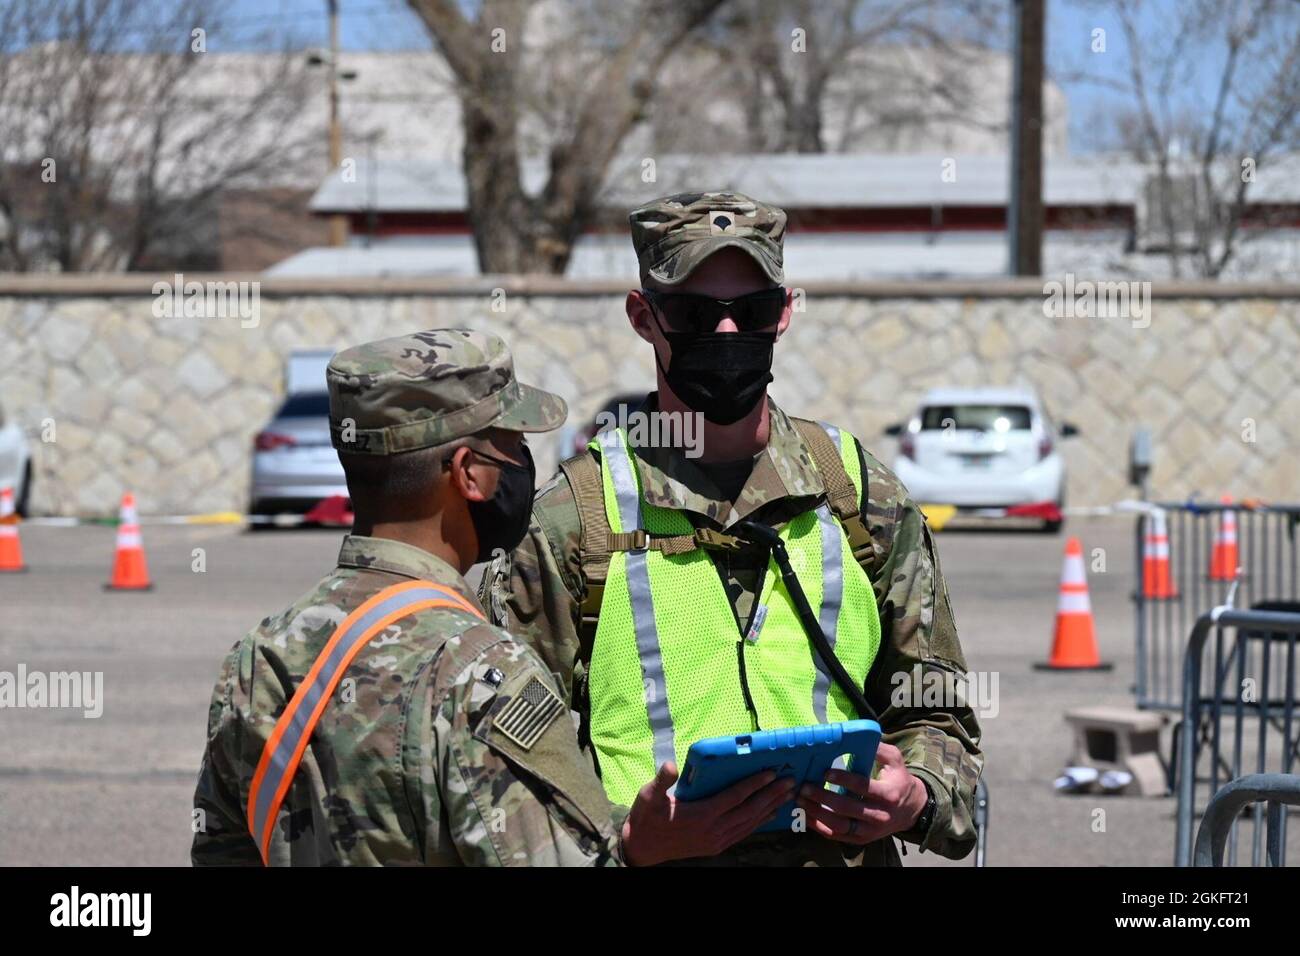 U.S. Army Pfc. Pedro Gutierrez, left, and Spc. Steven Prybylla, right, both assigned to the 3rd Squadron, 61st Cavalry Regiment, train on the vaccination check-in system at the drive-up lanes at the Community Vaccination Site (CVS) in Pueblo, Colorado, April 11, 2021. The drive-up lanes enable community members to acquire their COVID vaccination without having to exit their vehicles. U.S. Northern Command, through U.S. Army North, remains committed to providing continued, flexible Department of Defense support to the Federal Emergency Management Agency as part of the whole-of-government respon Stock Photo